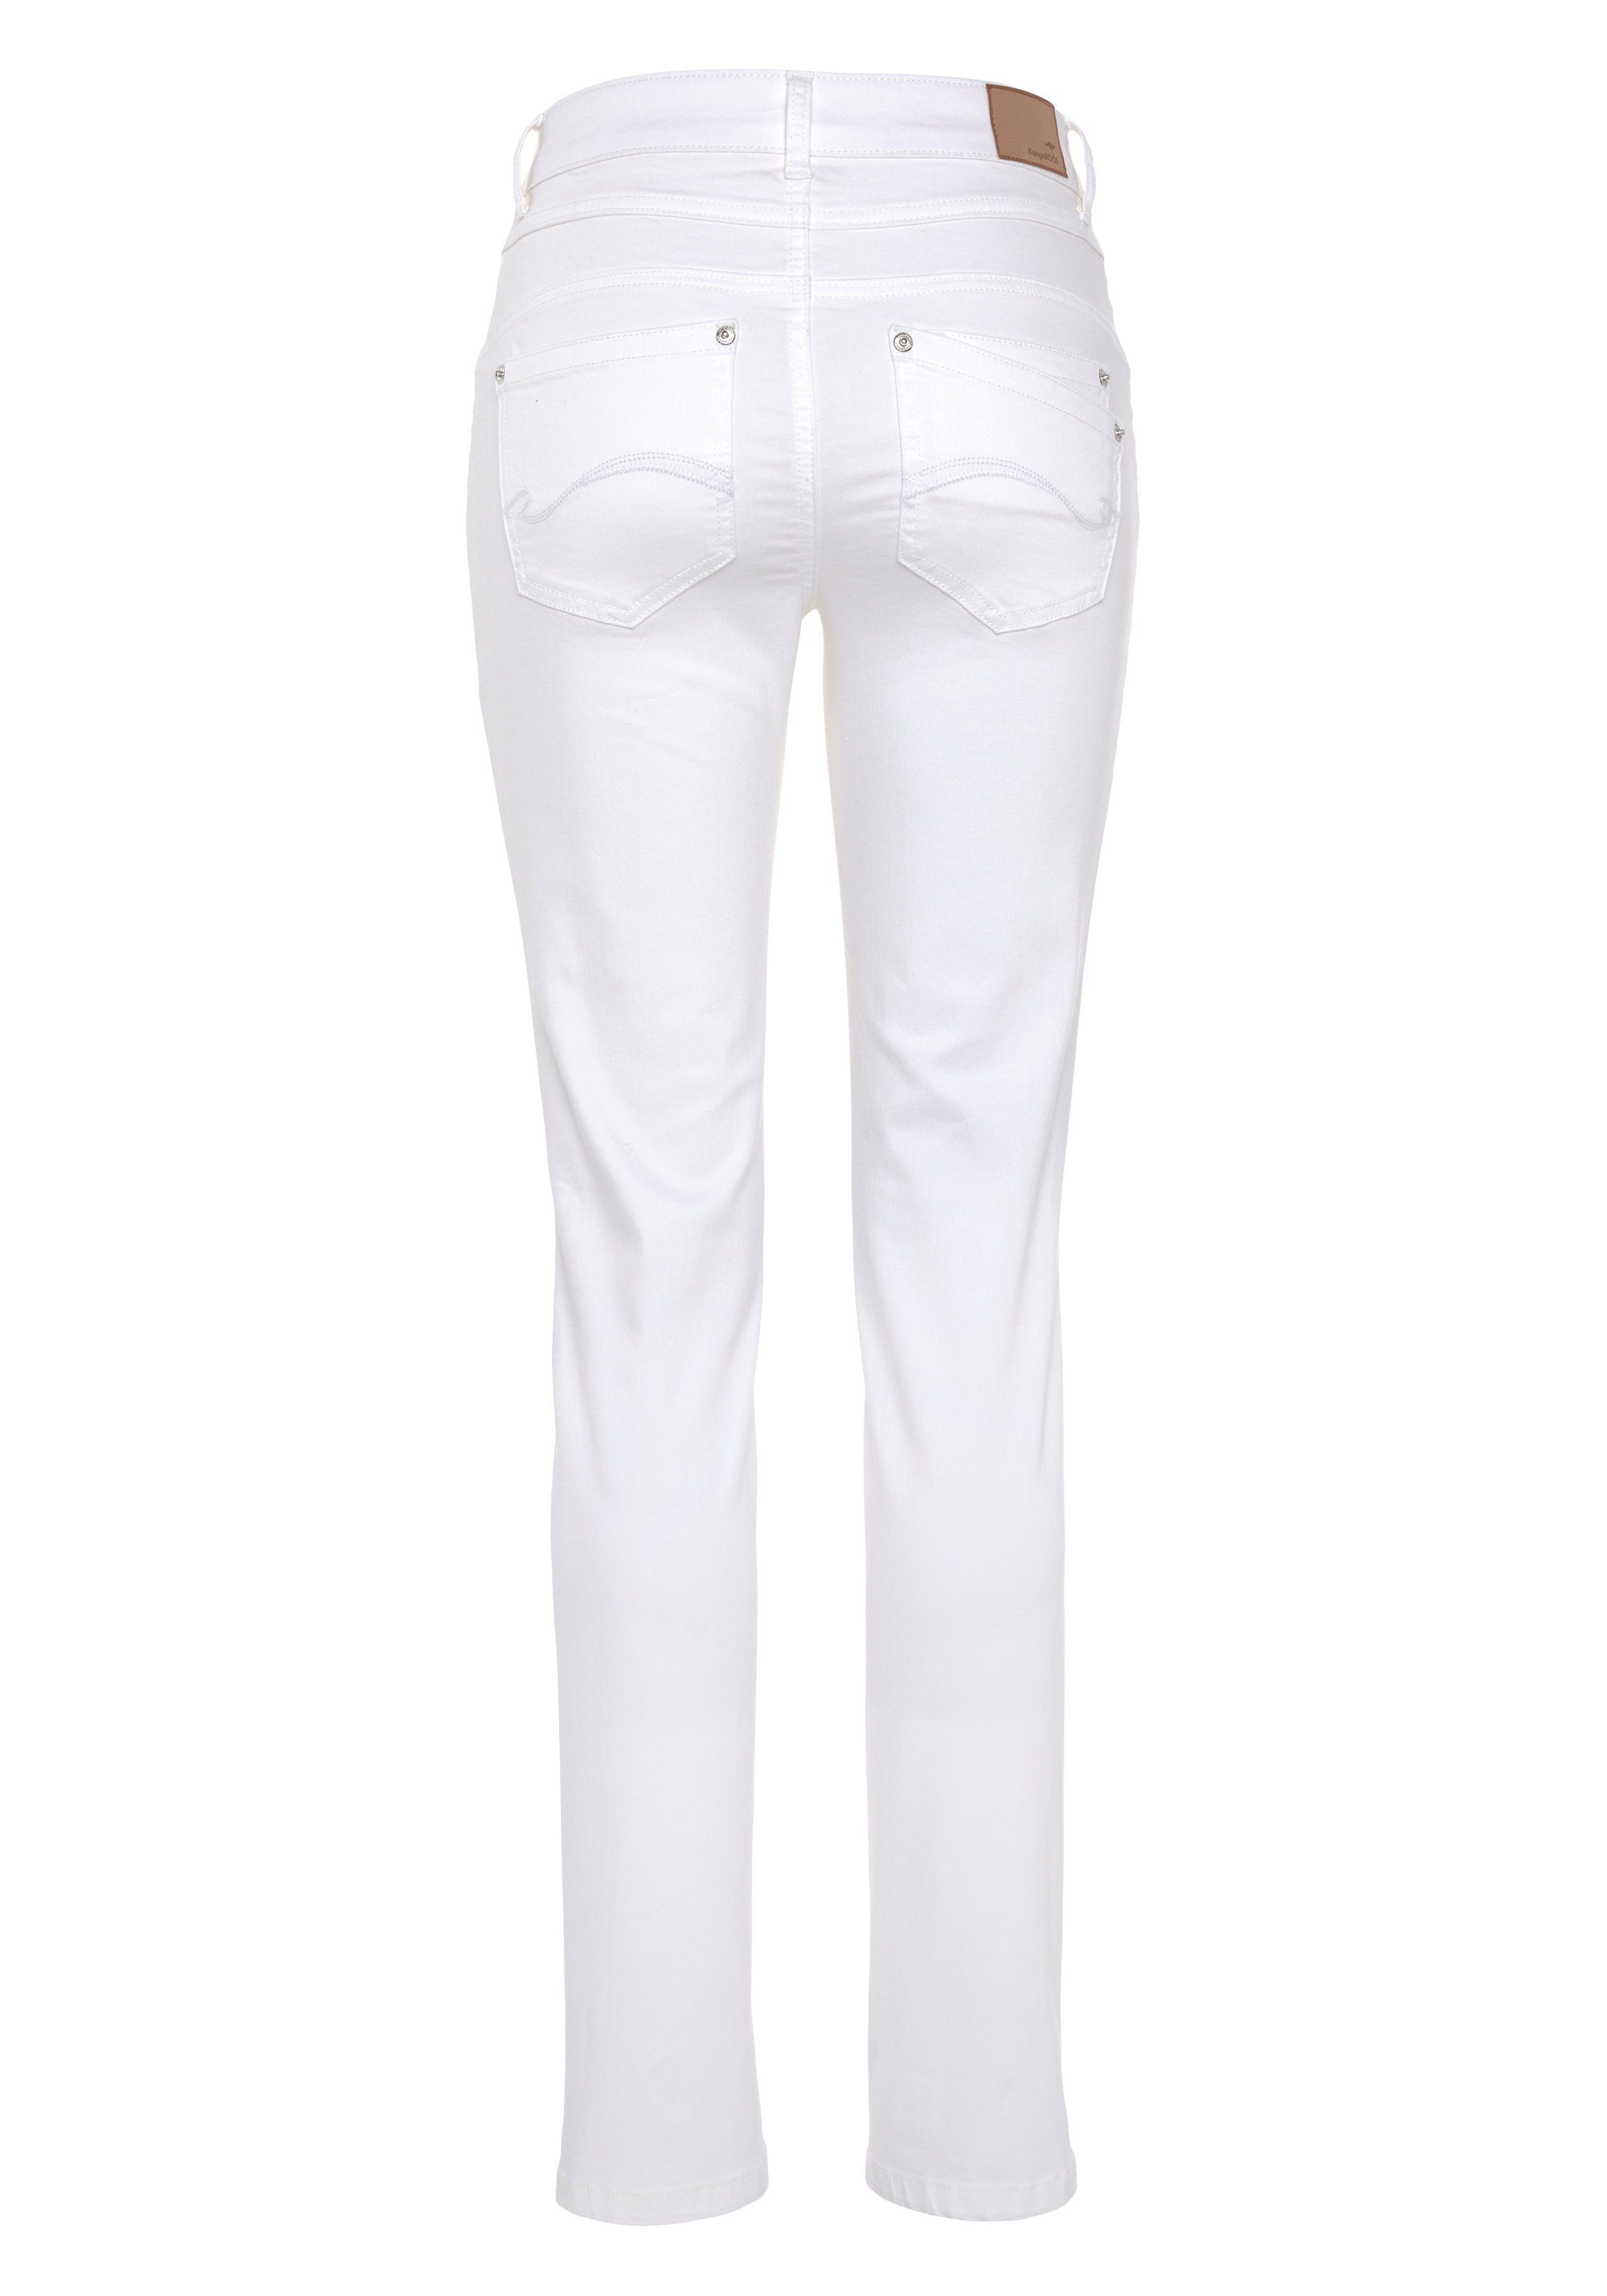 KangaROOS Relax-fit-Jeans RELAX-FIT white WAIST HIGH